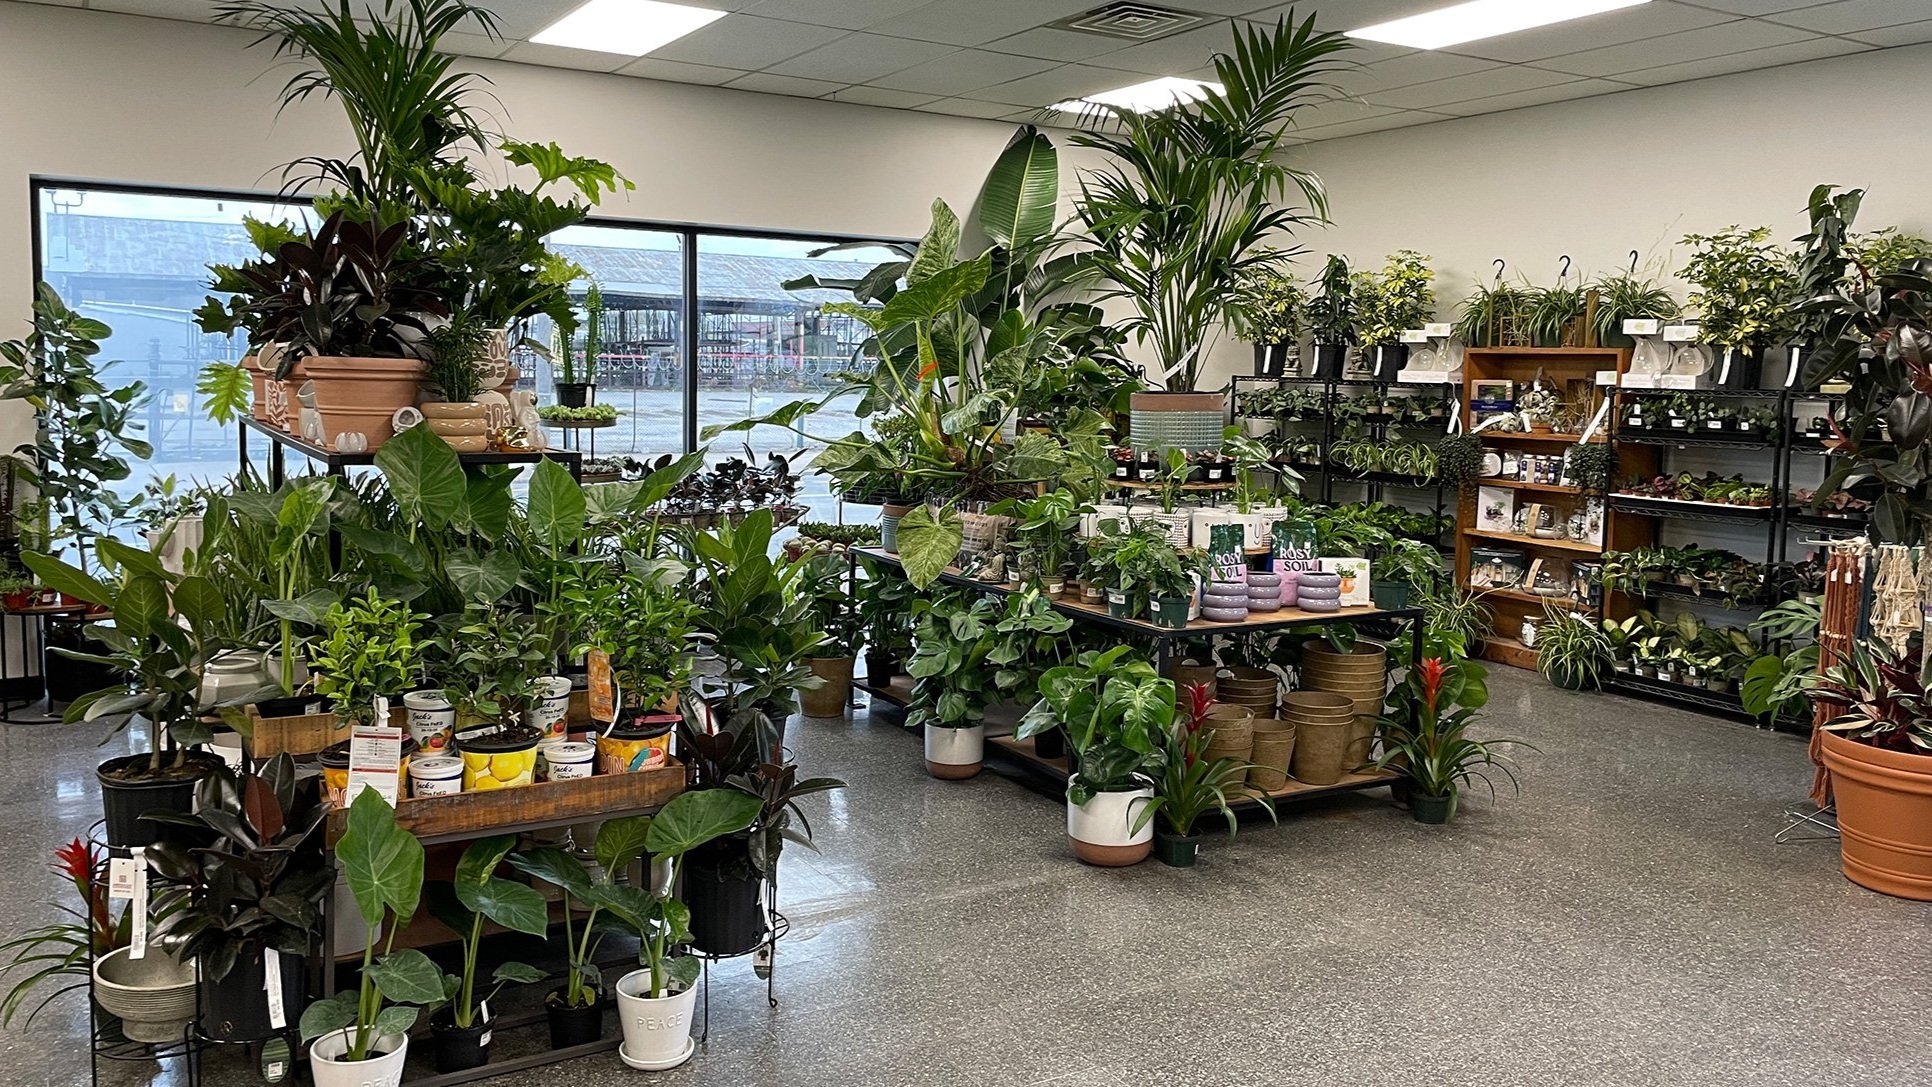  Our new location in the NULU neighborhood allows for a large selection of unique and interesting indoor plants, pots, fountains, and other gardening essentials.  